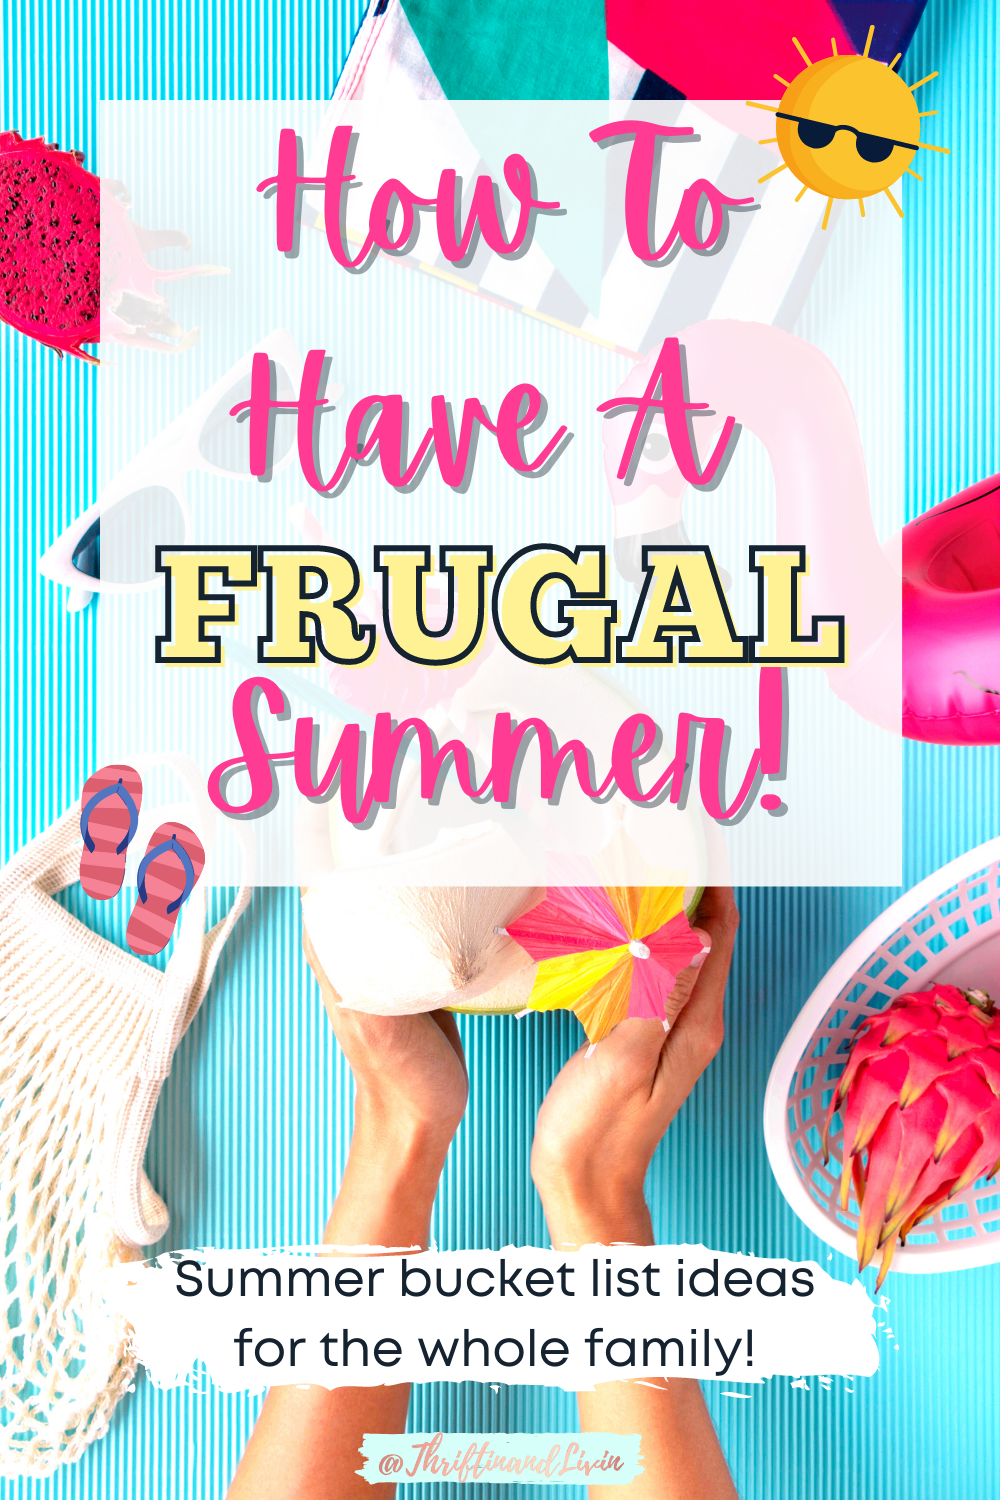 How To Have A Frugal Summer - Summer bucket list ideas for the whole family! Pinterest Pin Image